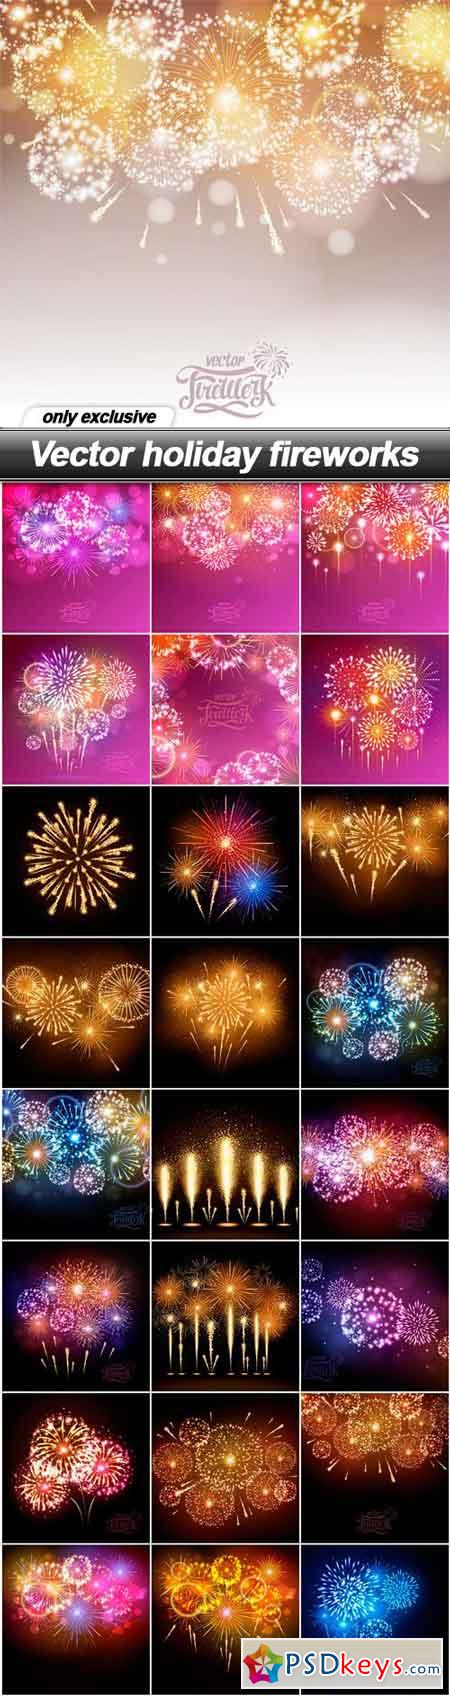 Vector holiday fireworks - 25 EPS